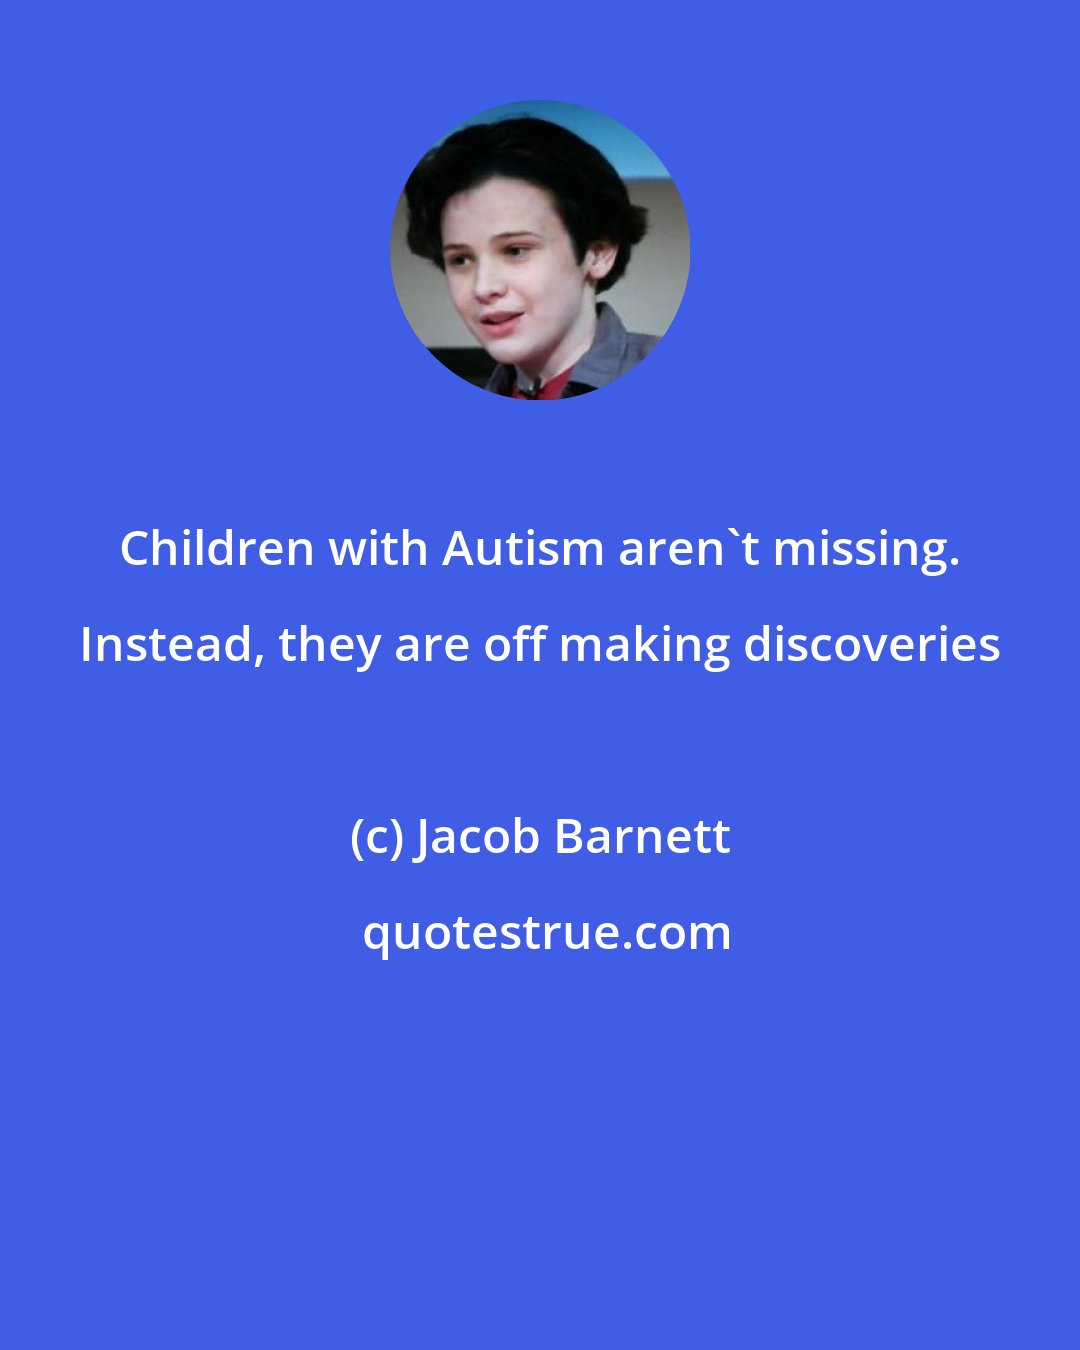 Jacob Barnett: Children with Autism aren't missing. Instead, they are off making discoveries